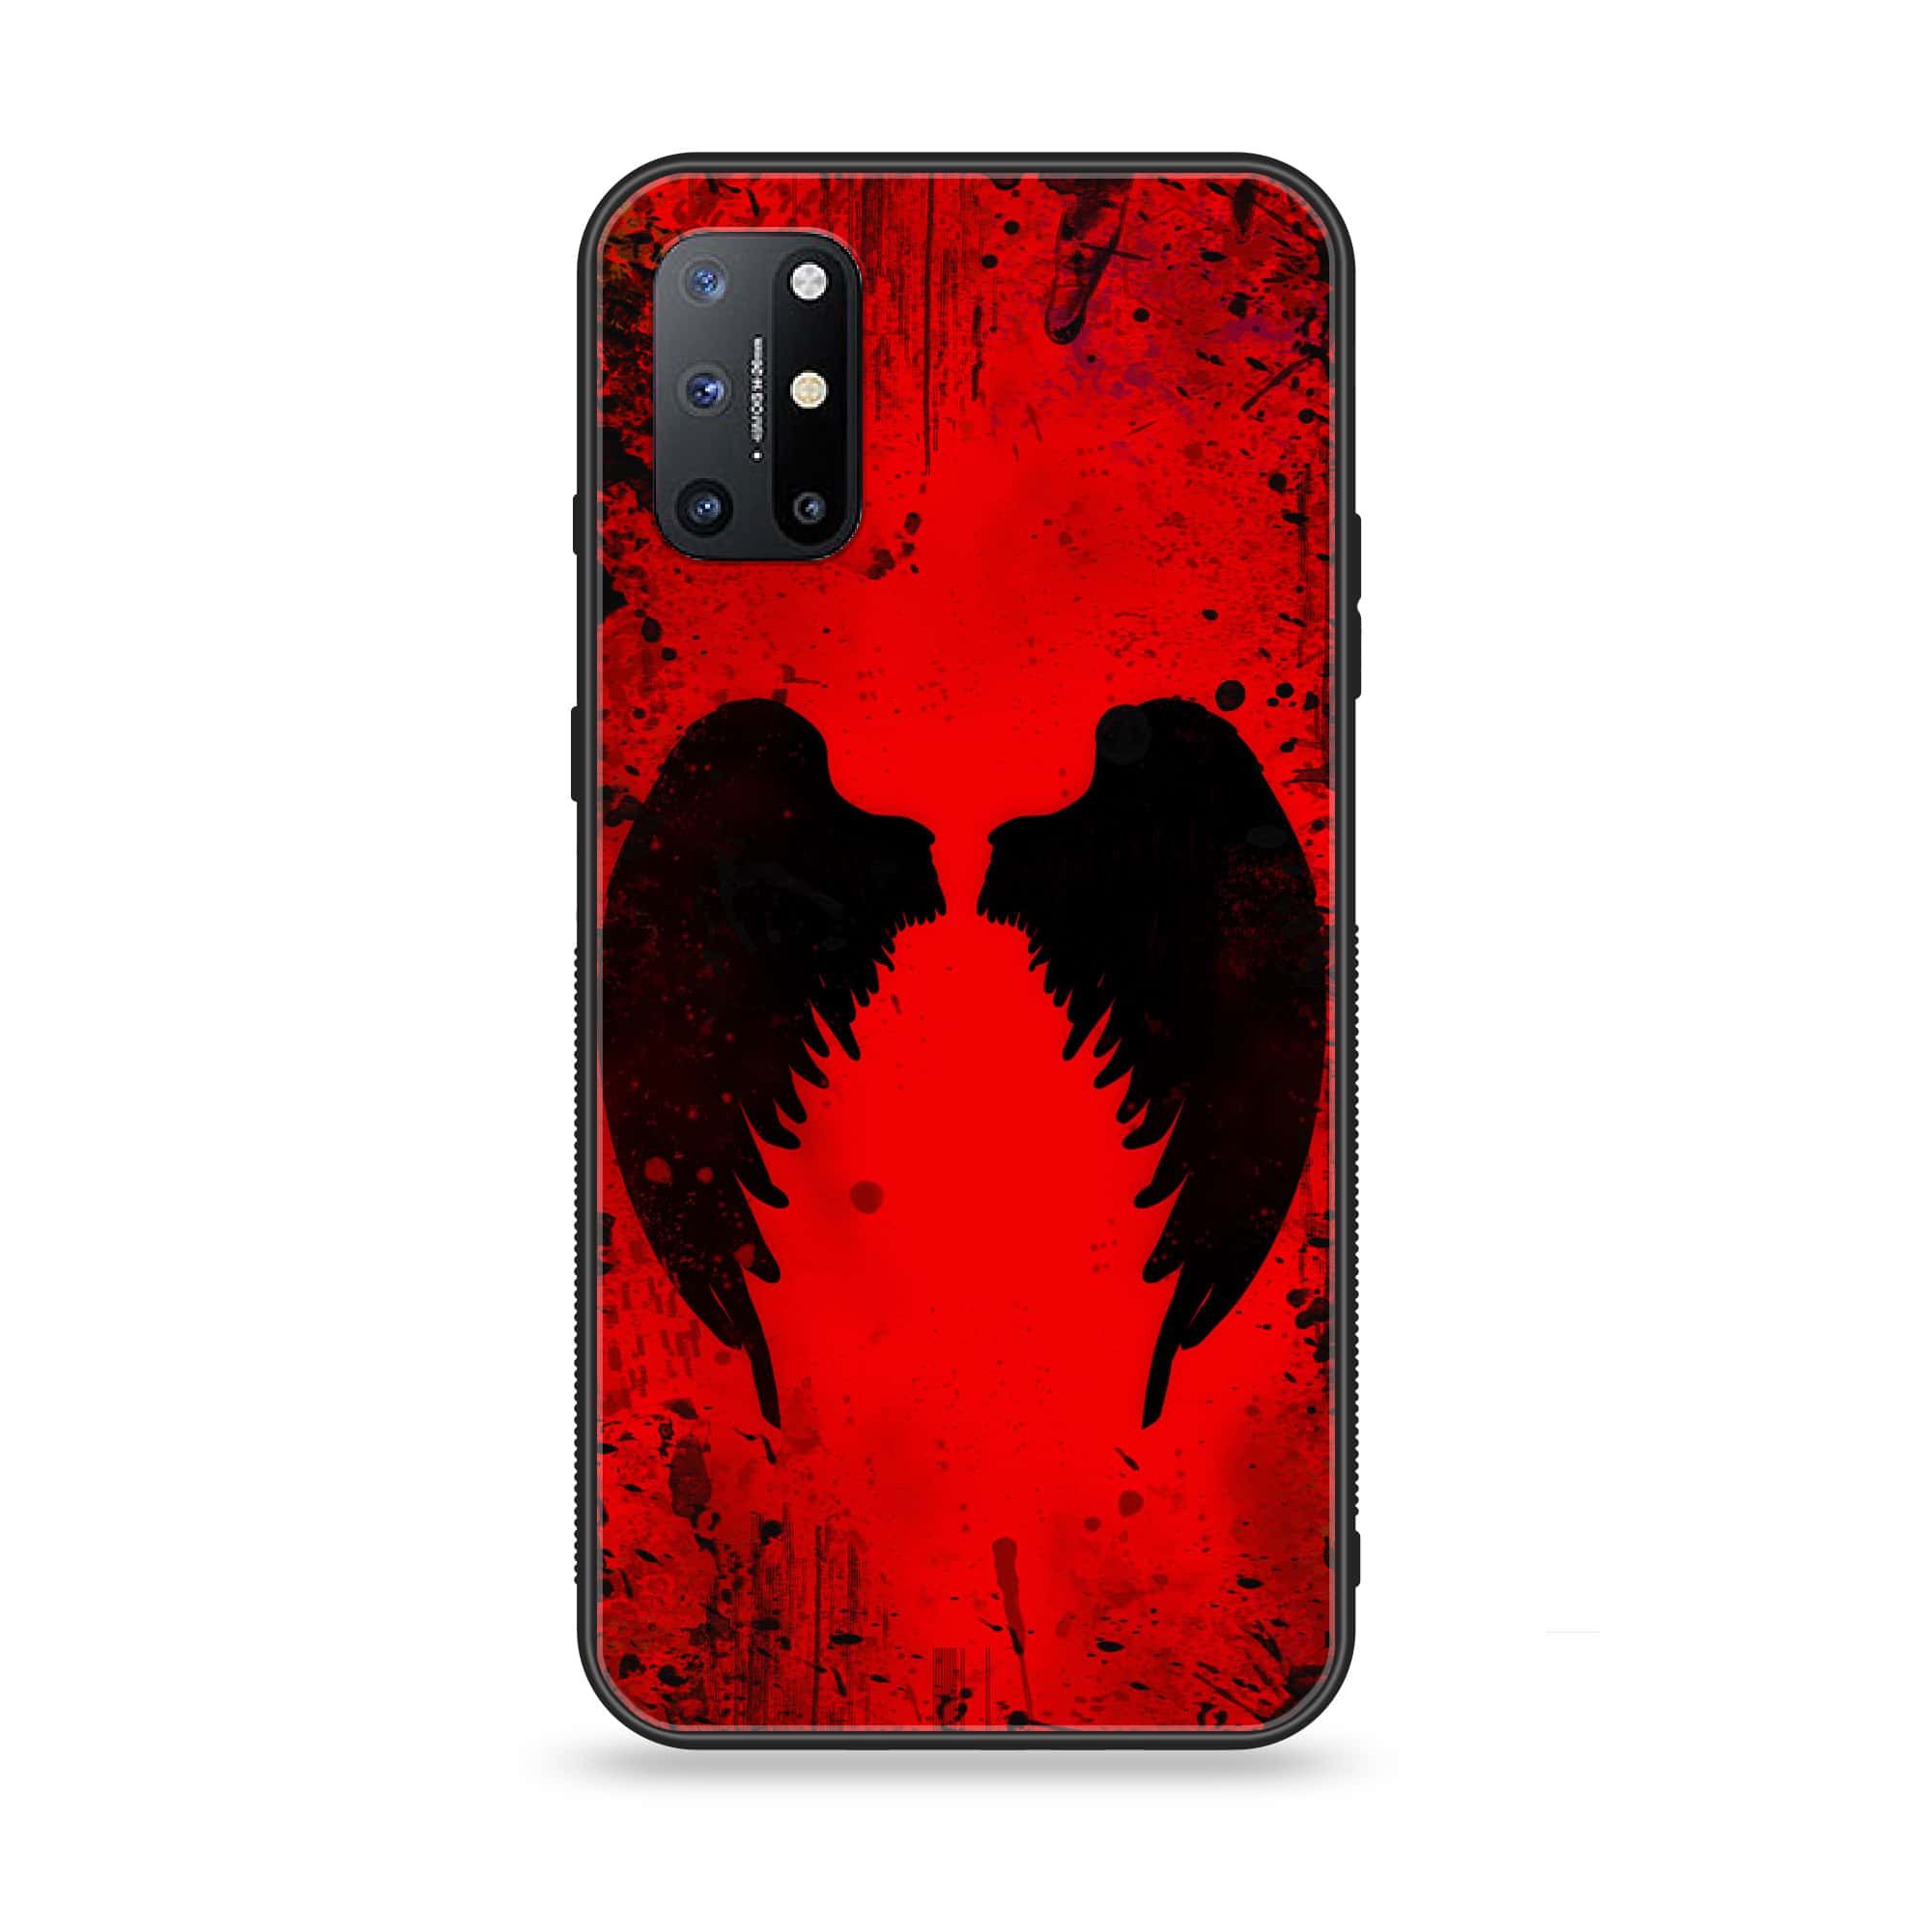 OnePlus 8T - Angel Wings 2.0 Series - Premium Printed Glass soft Bumper shock Proof Case